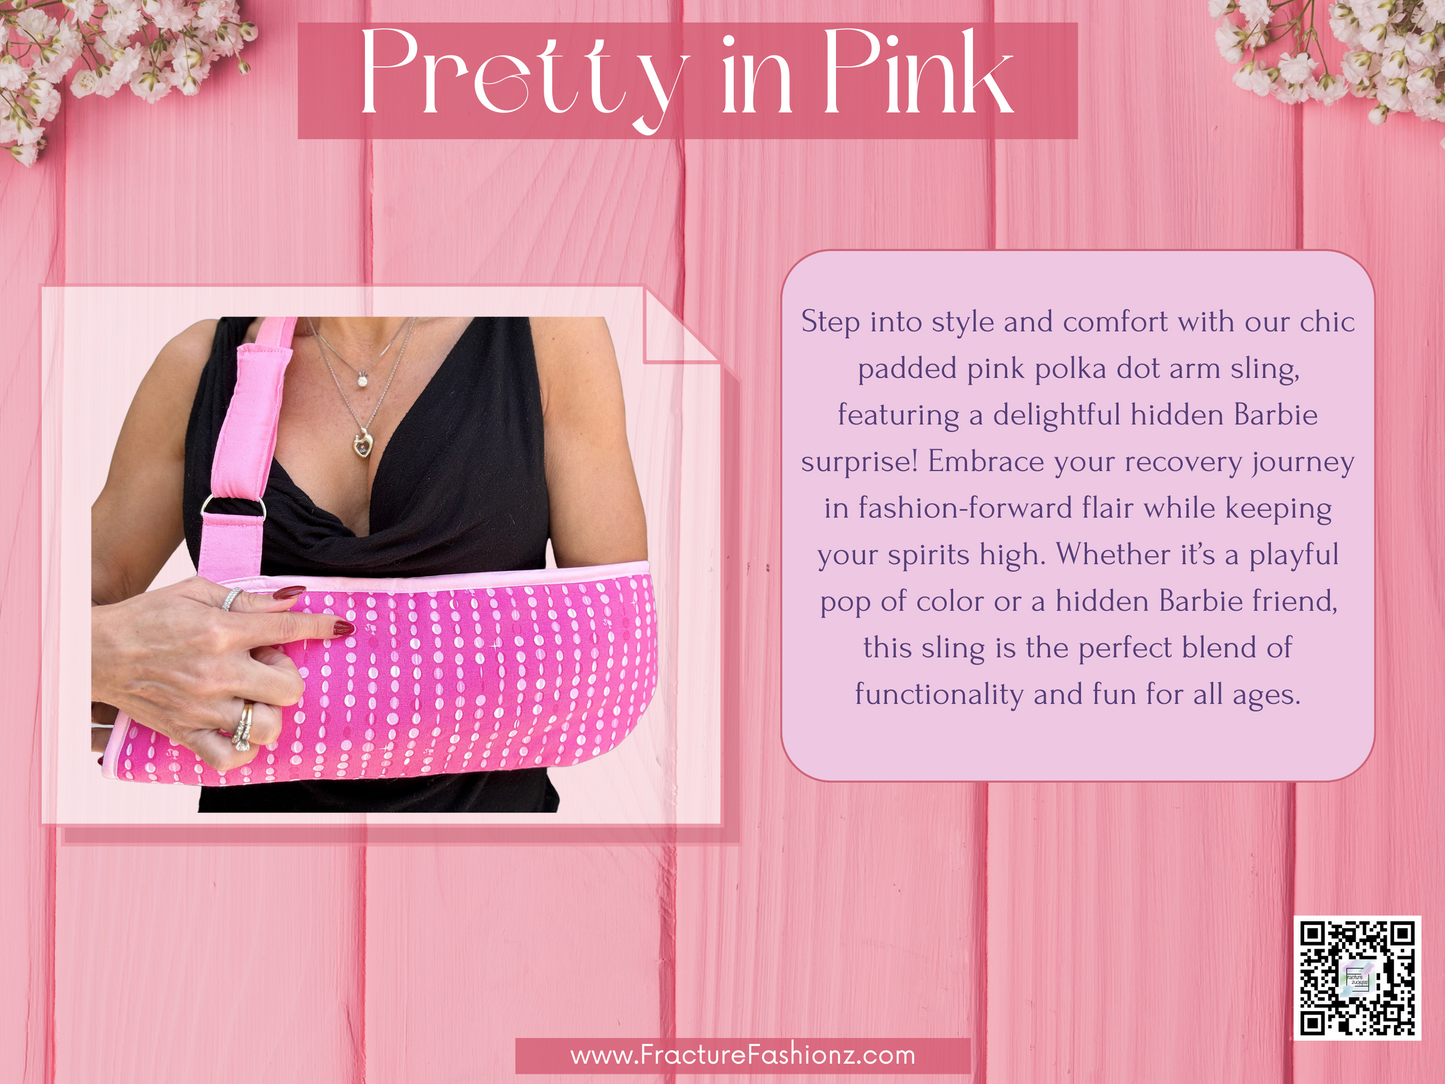 Pretty in Pink: Fashionable Arm Sling for a Stylish Recovery